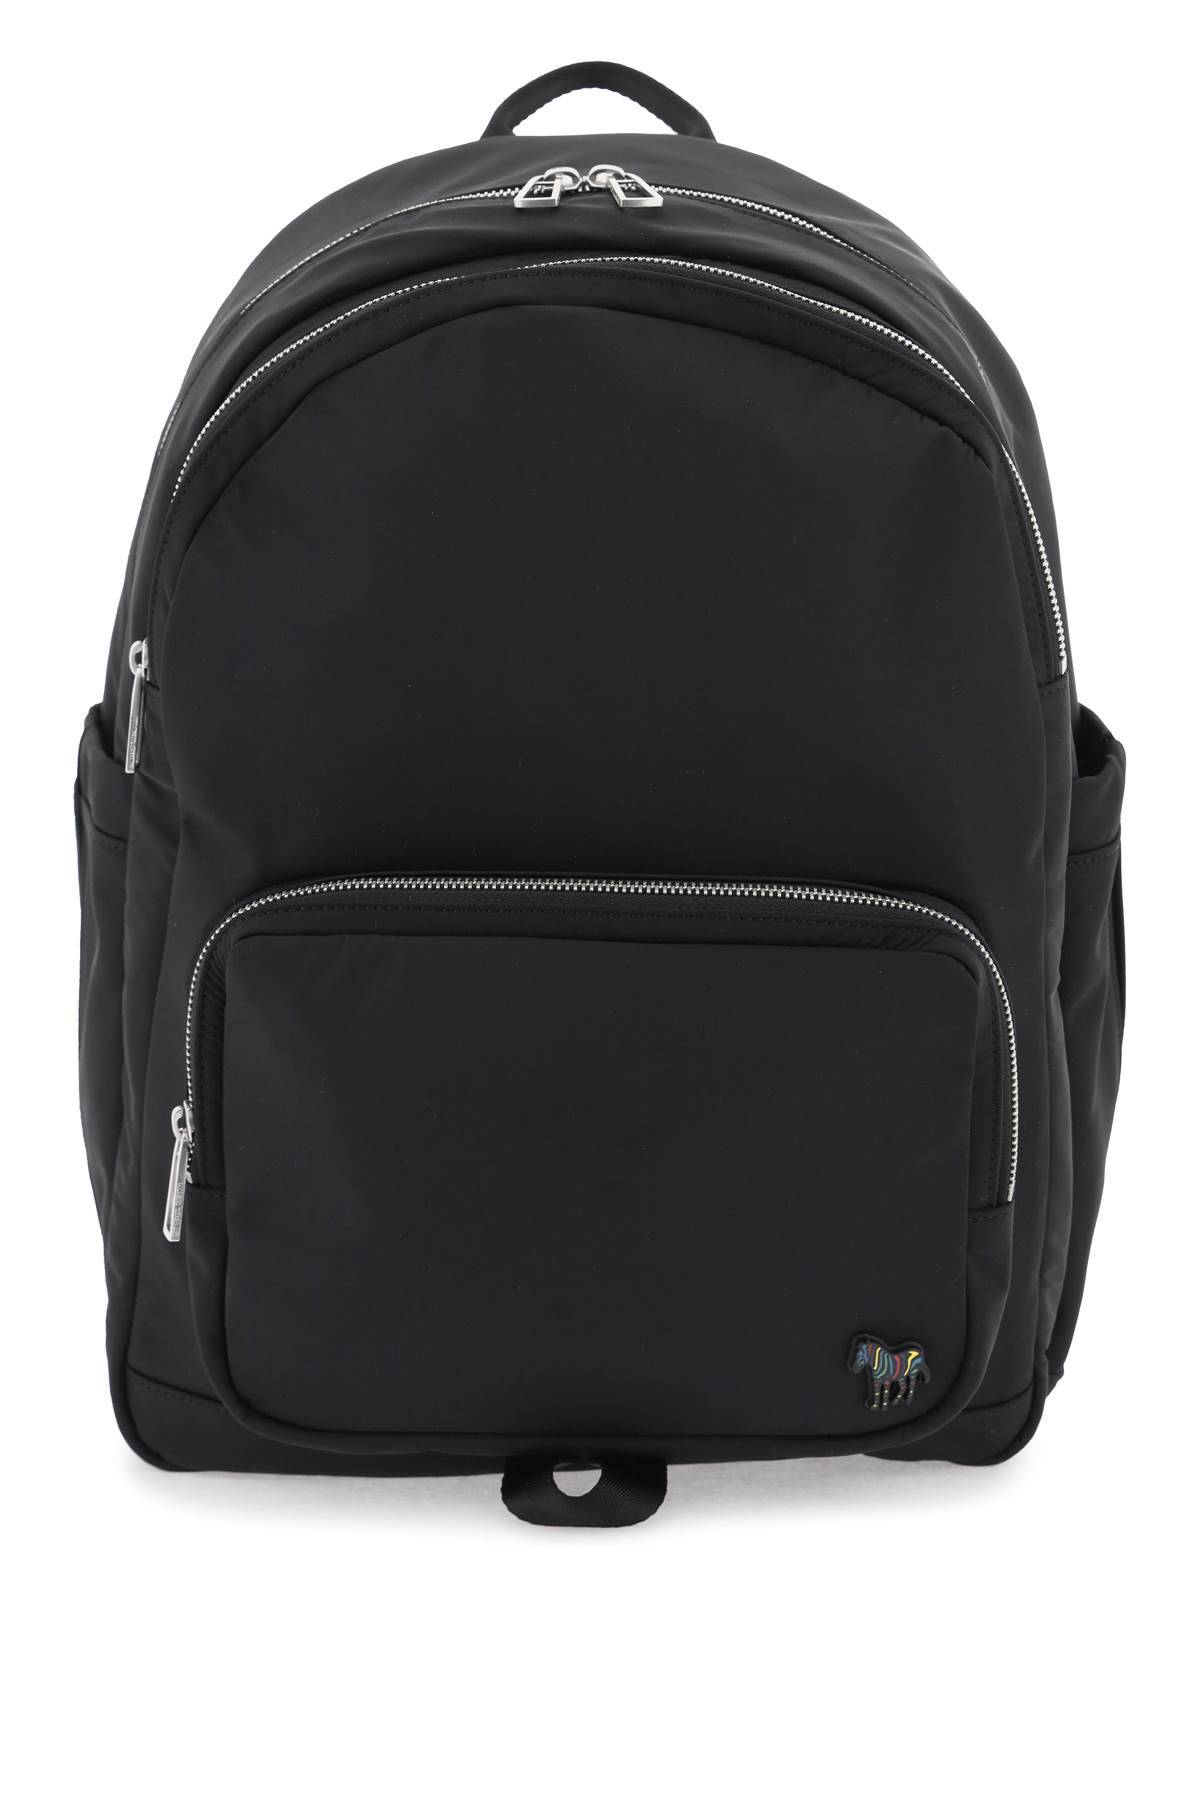 Ps Paul Smith PS PAUL SMITH nylon backpack with zebra detail